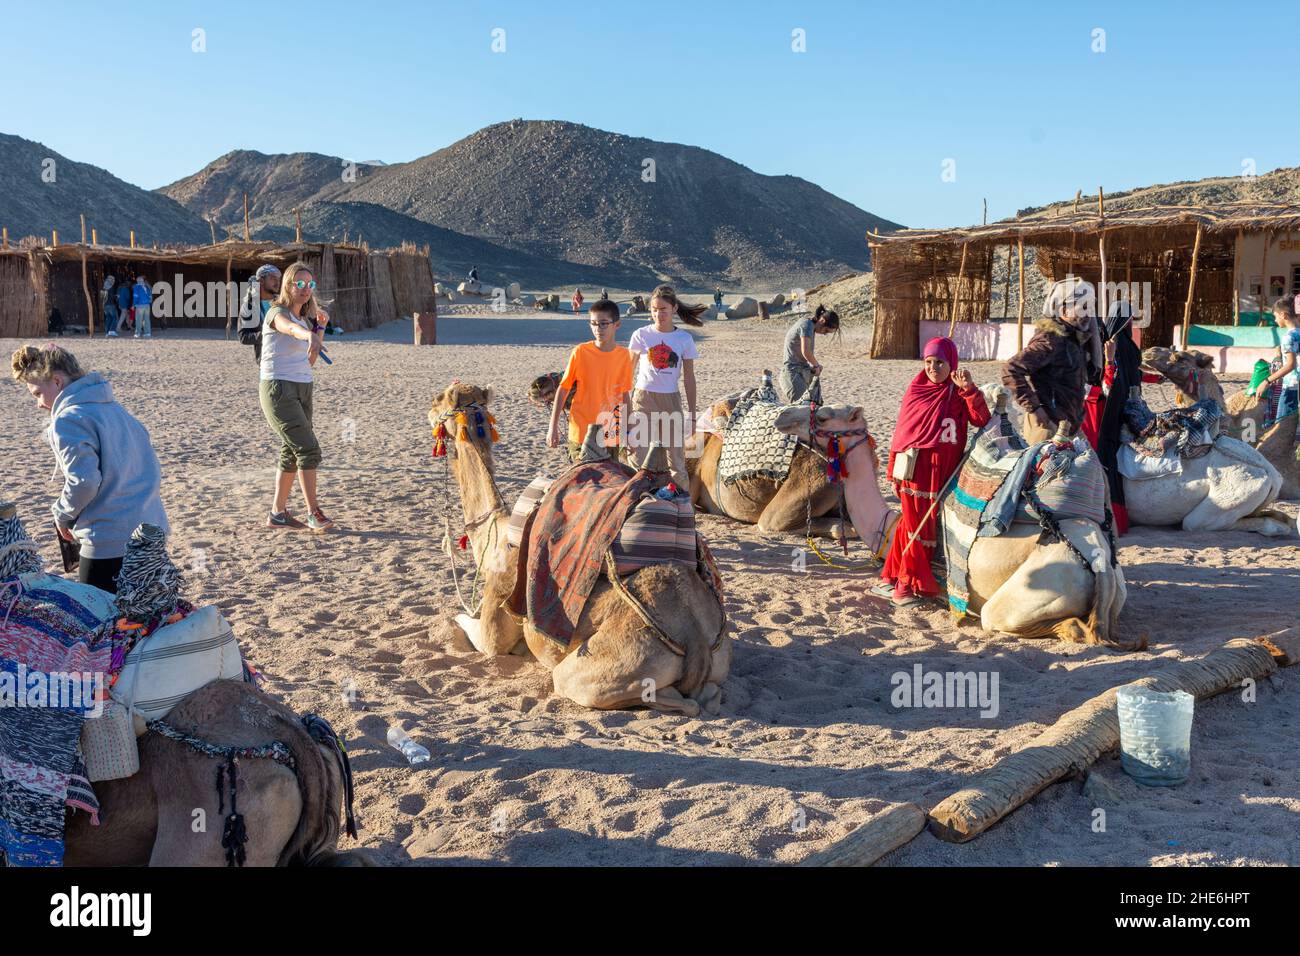 People ride camels in the Sahara desert, near a Bedouin village. Stock Photo